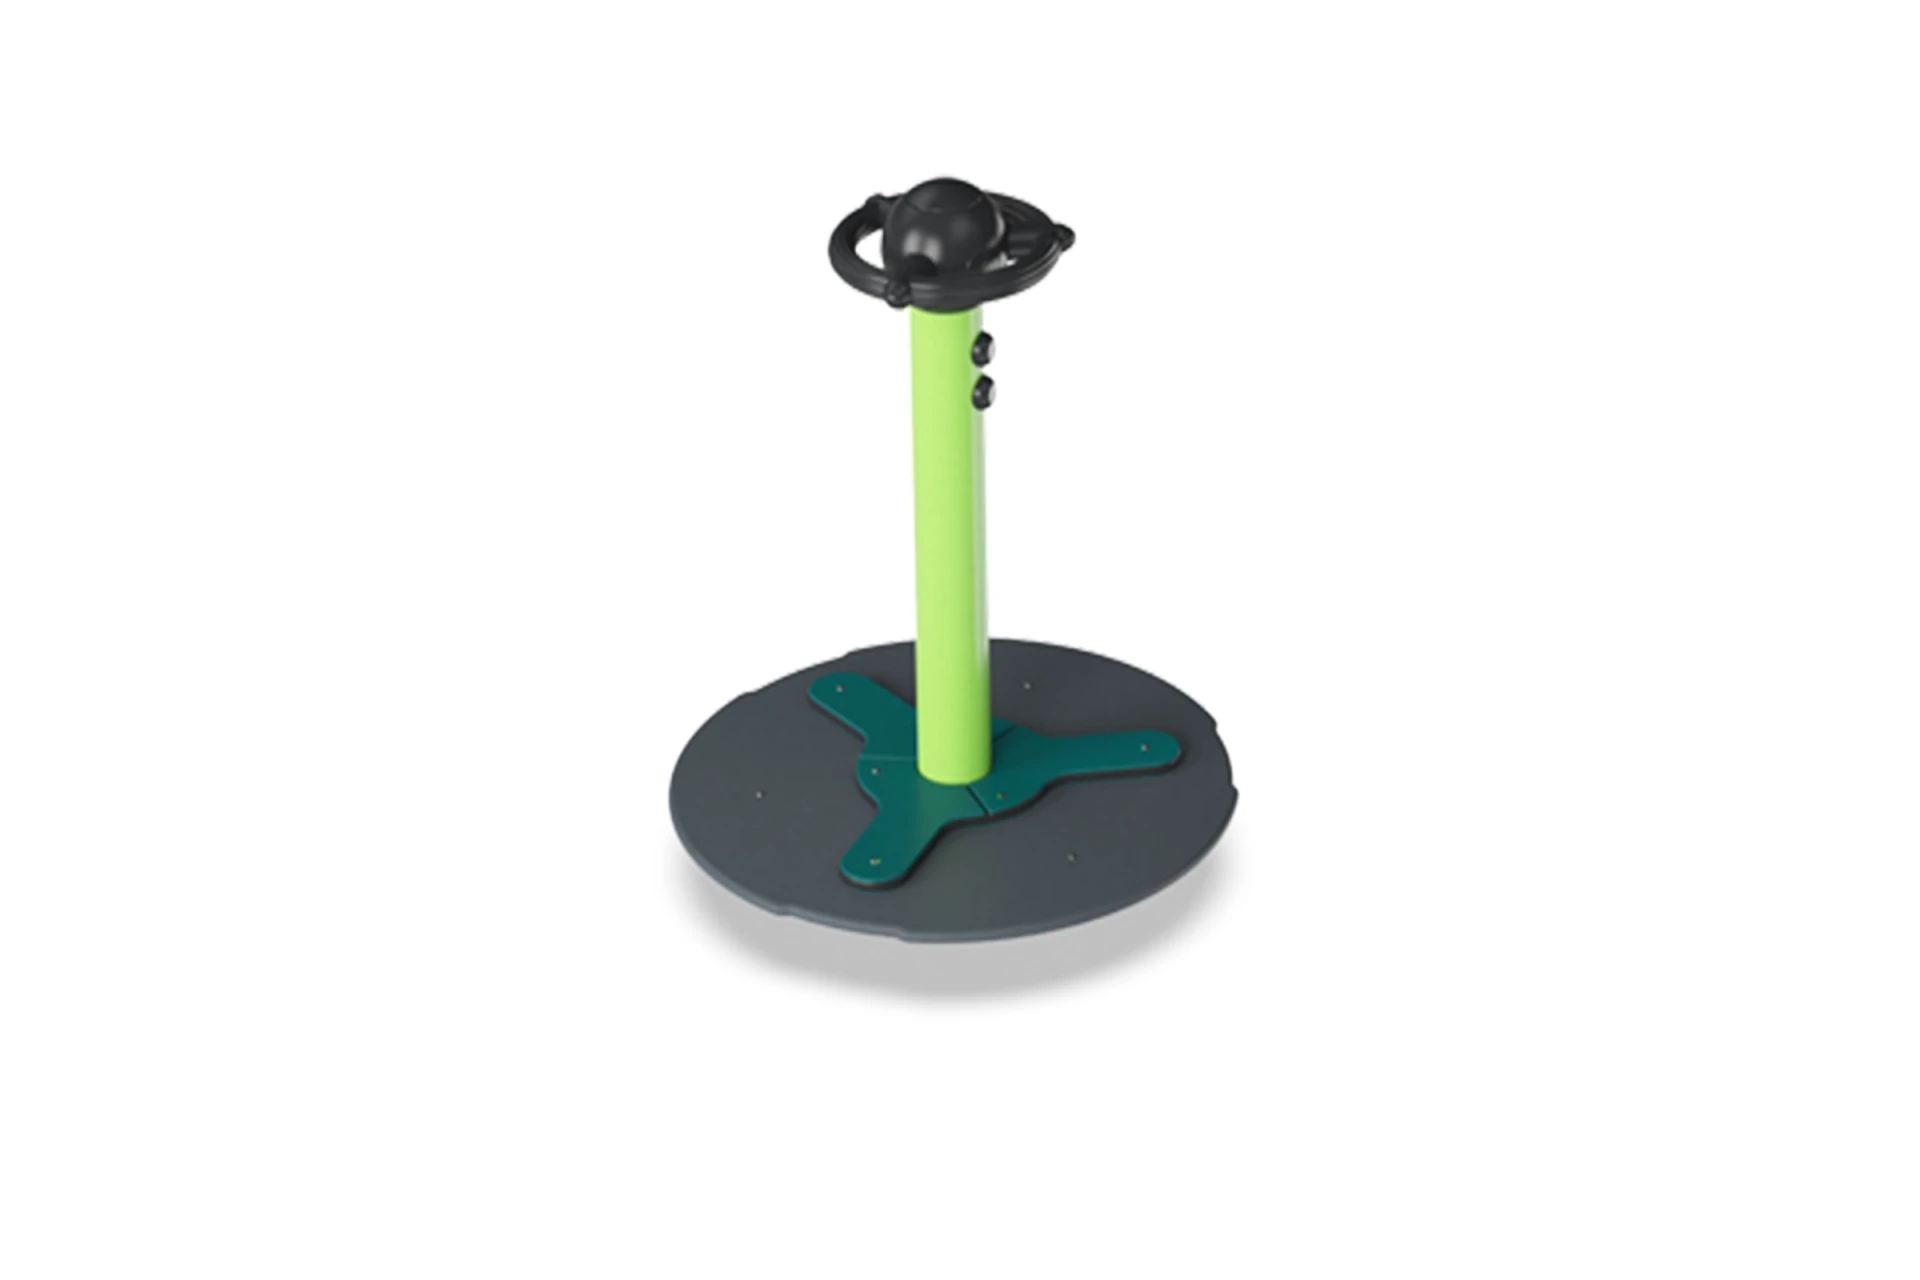 Scooter Carousel, productphoto